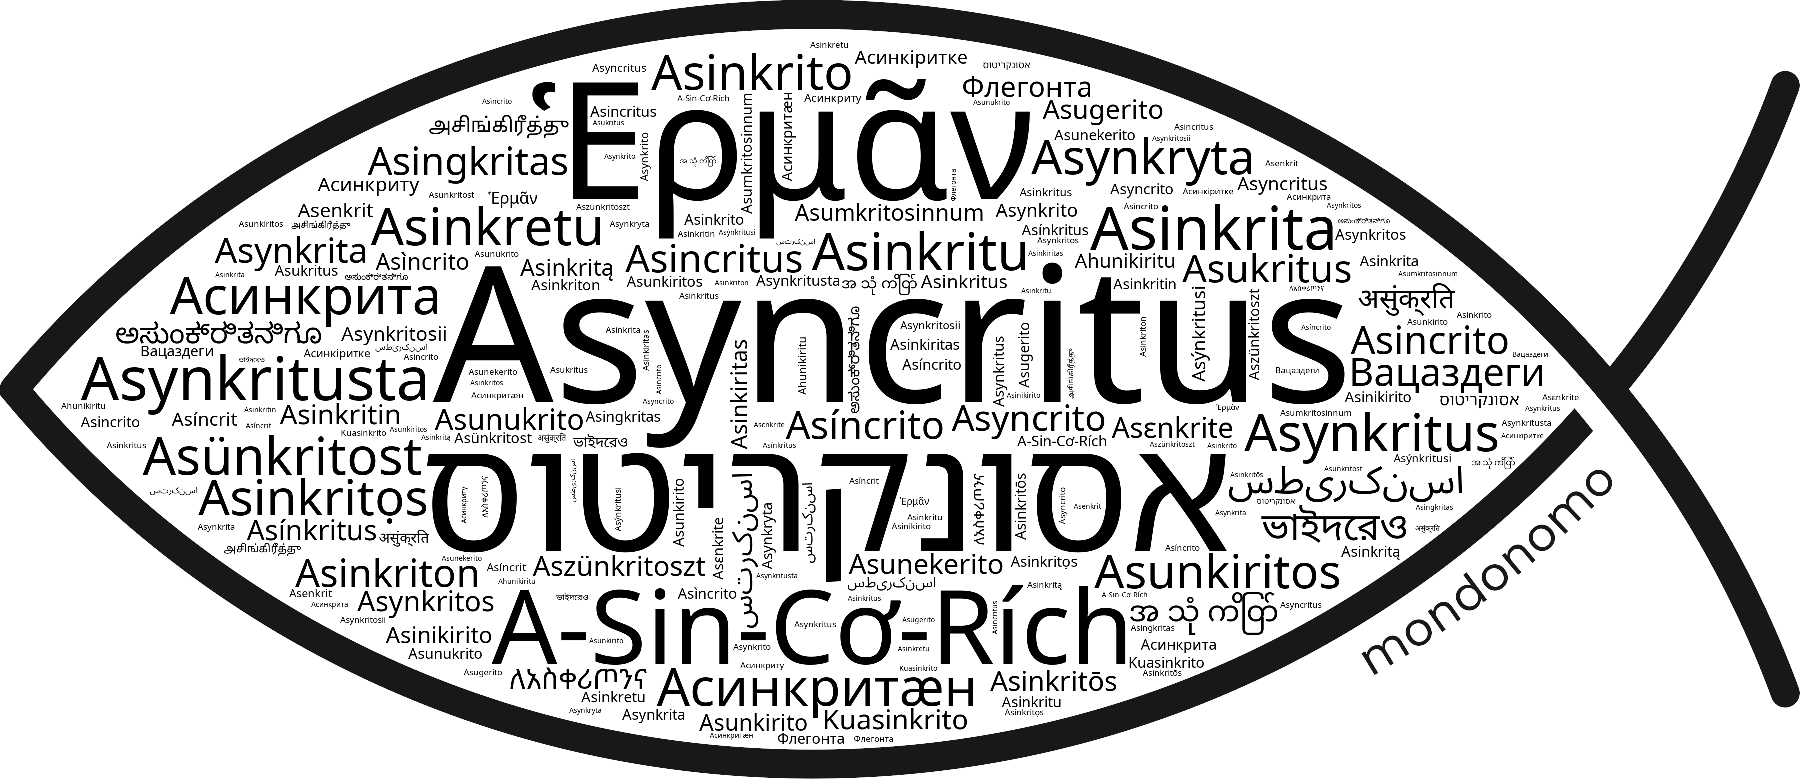 Name Asyncritus in the world's Bibles